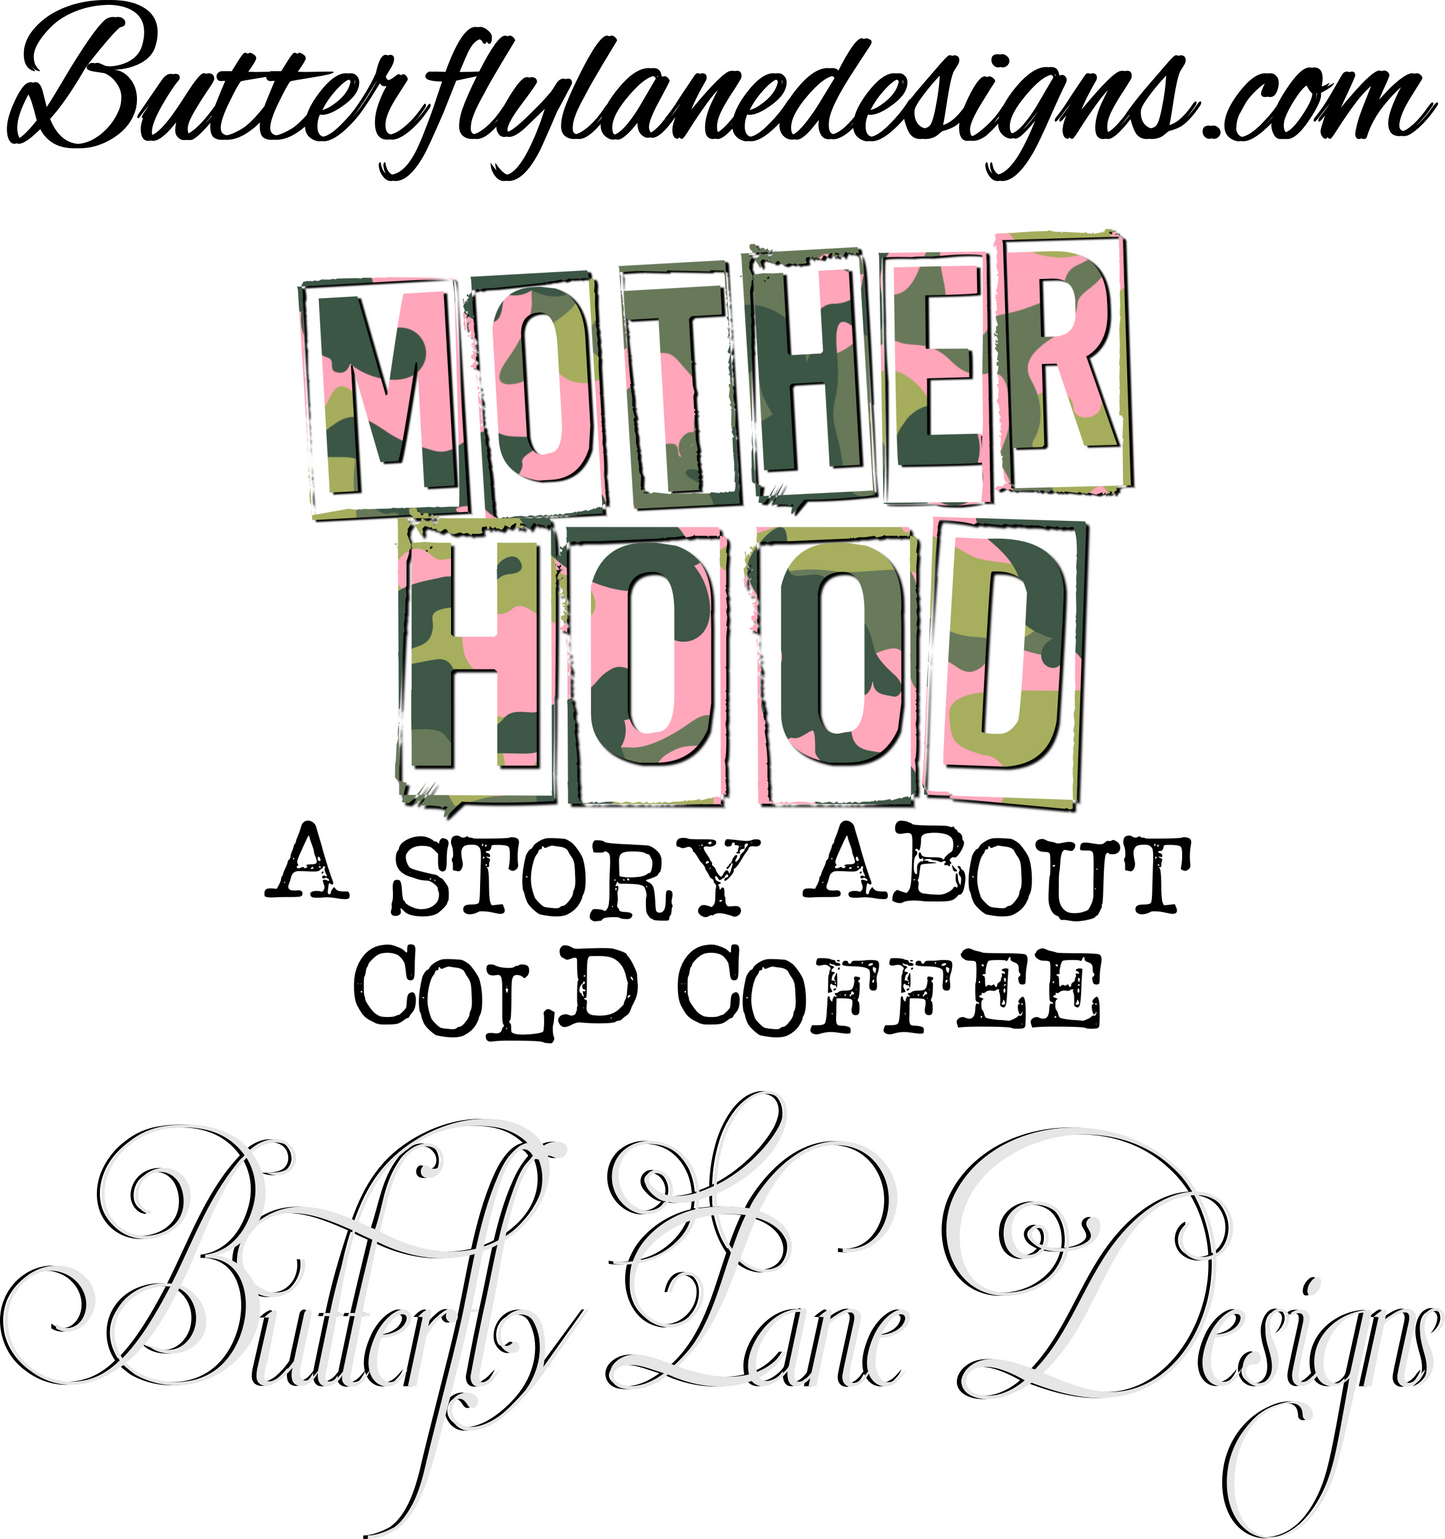 Motherhood-Story about cold coffee  :: Clear Cast Decal